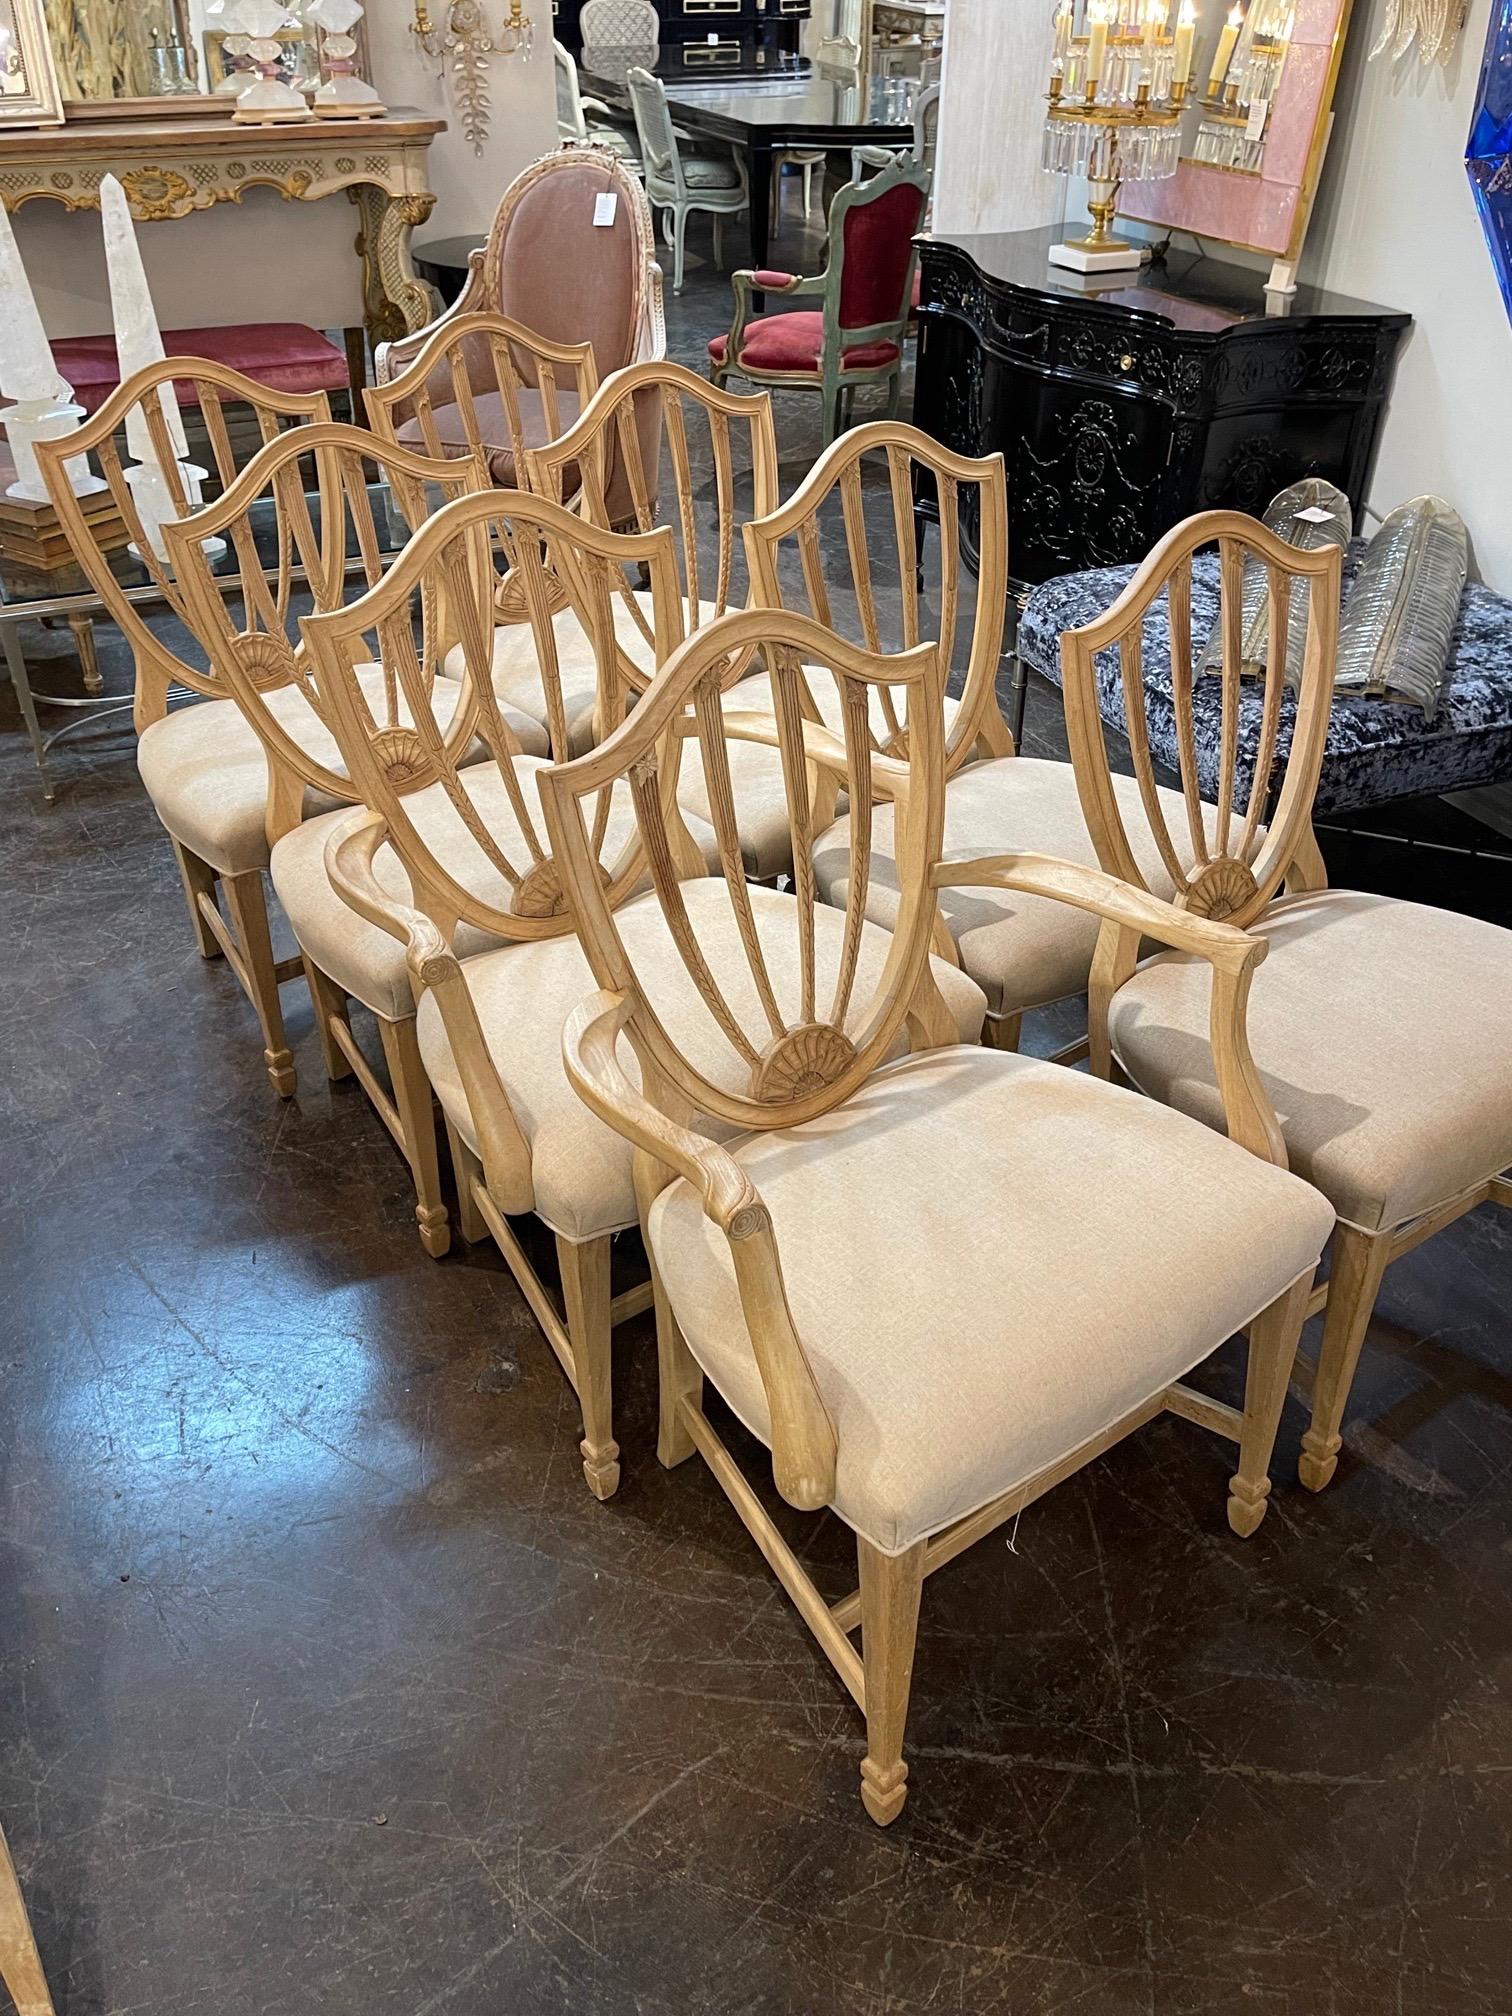 Very fine set of 8 English bleached mahogany shield back dining chairs. Nice carving and pretty beige linen upholstery. Great quality and comfortable as well!